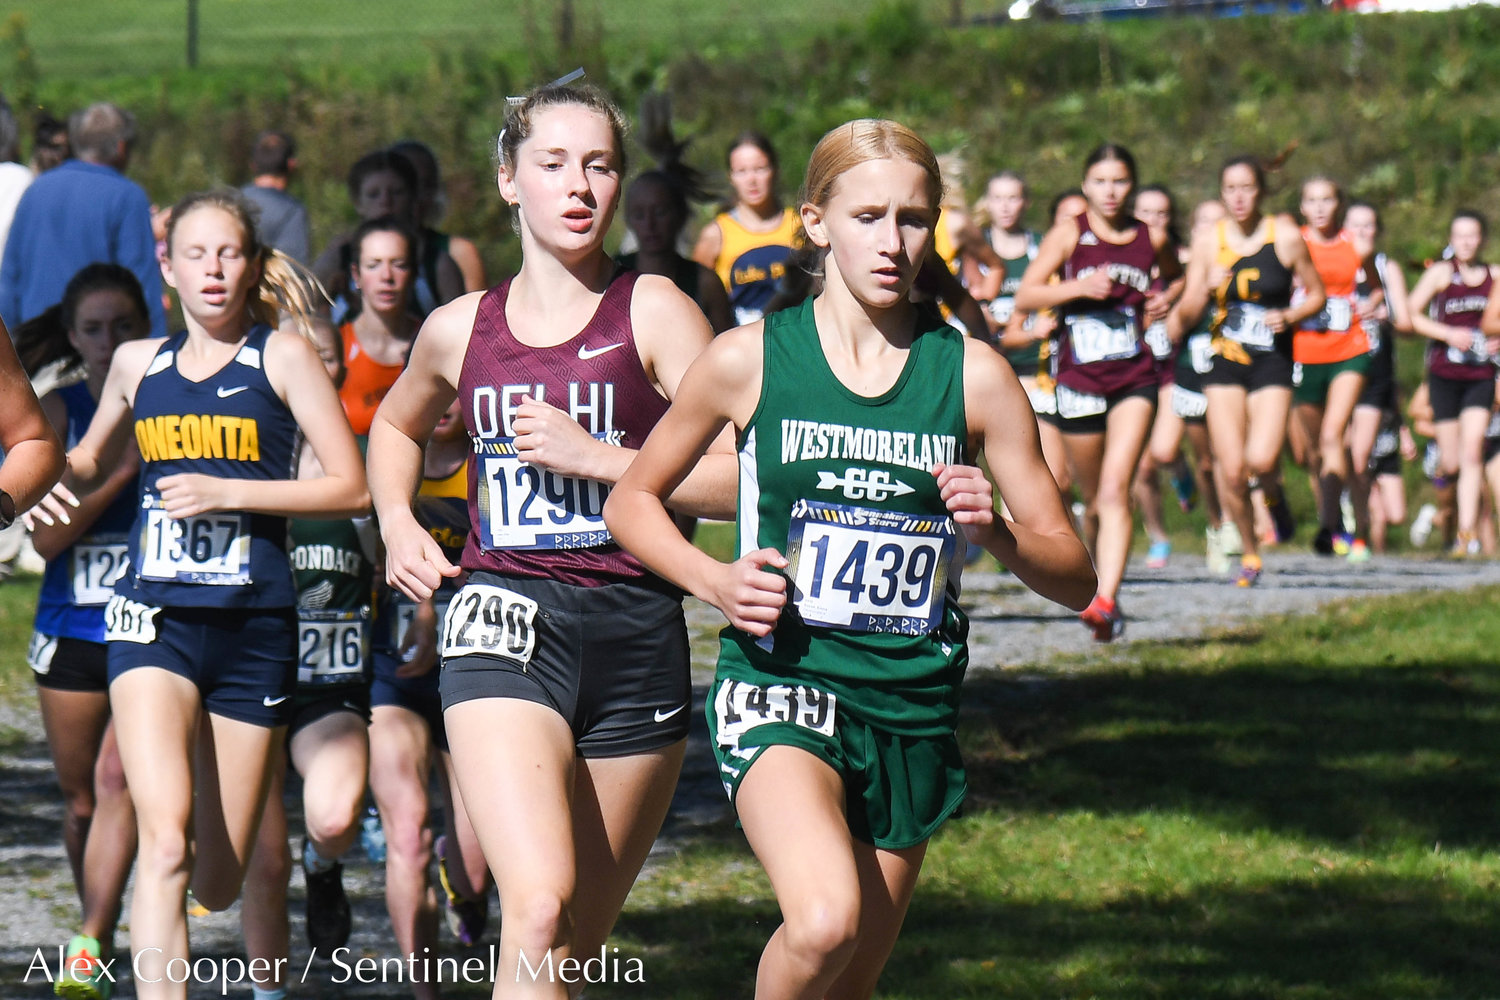 Westmoreland runner Emma Szarek competes during the 79th EJ Herrmann XC Invitational on Saturday, Sept. 24 at Proctor Park in Utica.